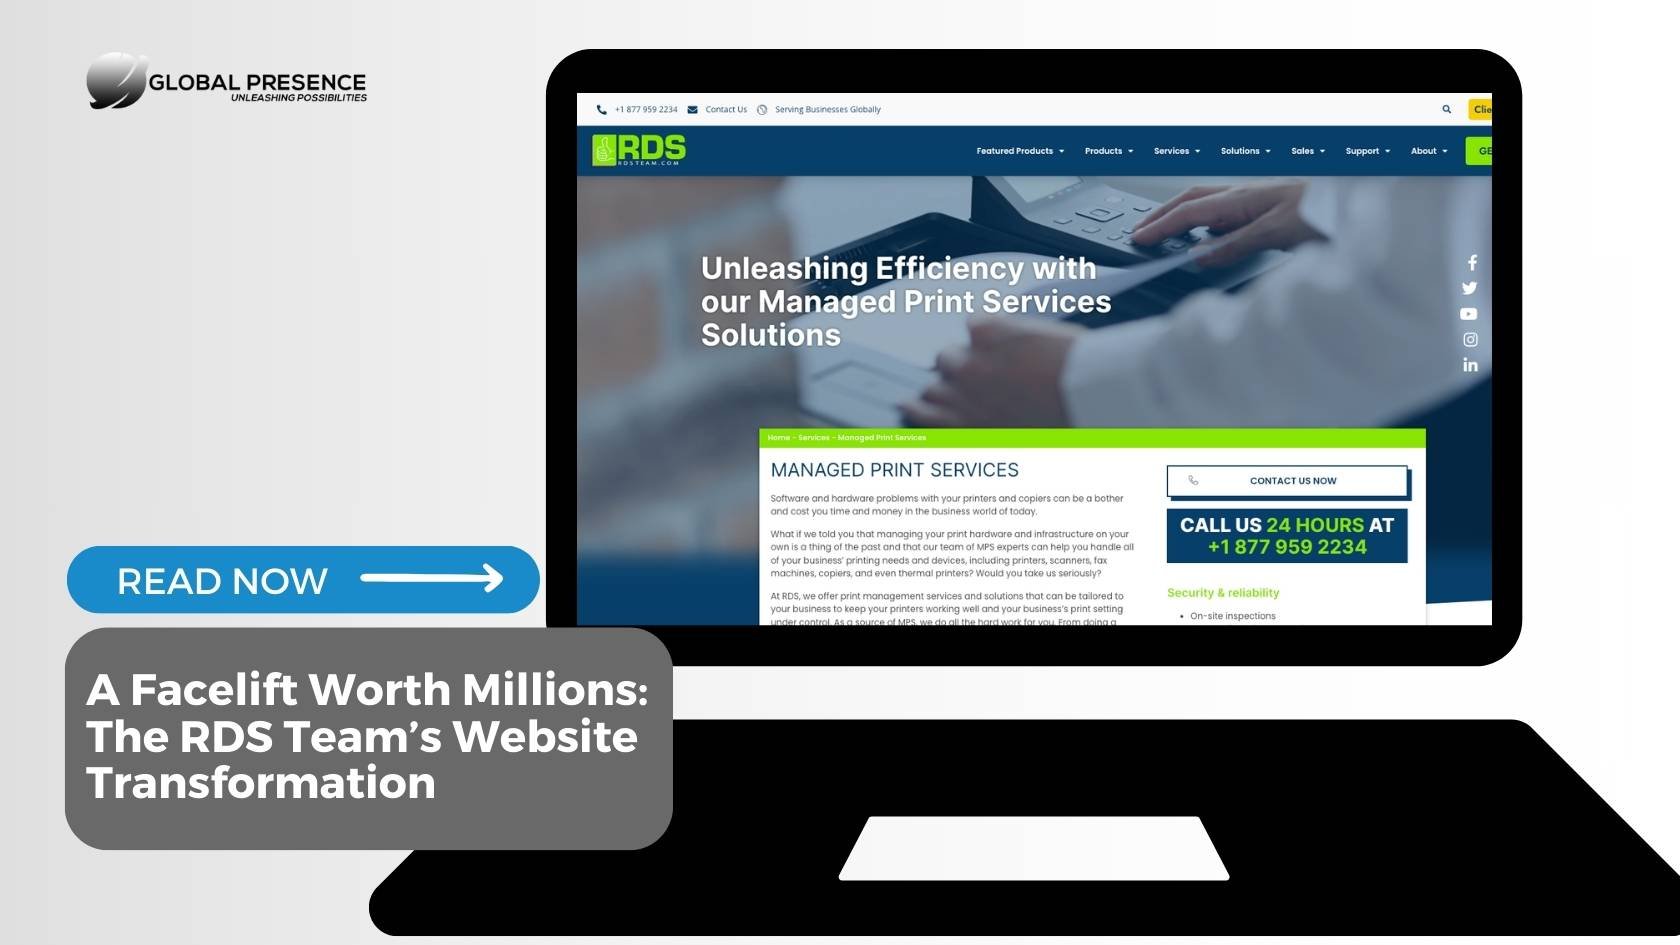 A Facelift Worth Millions: The RDS Team’s Website Transformation